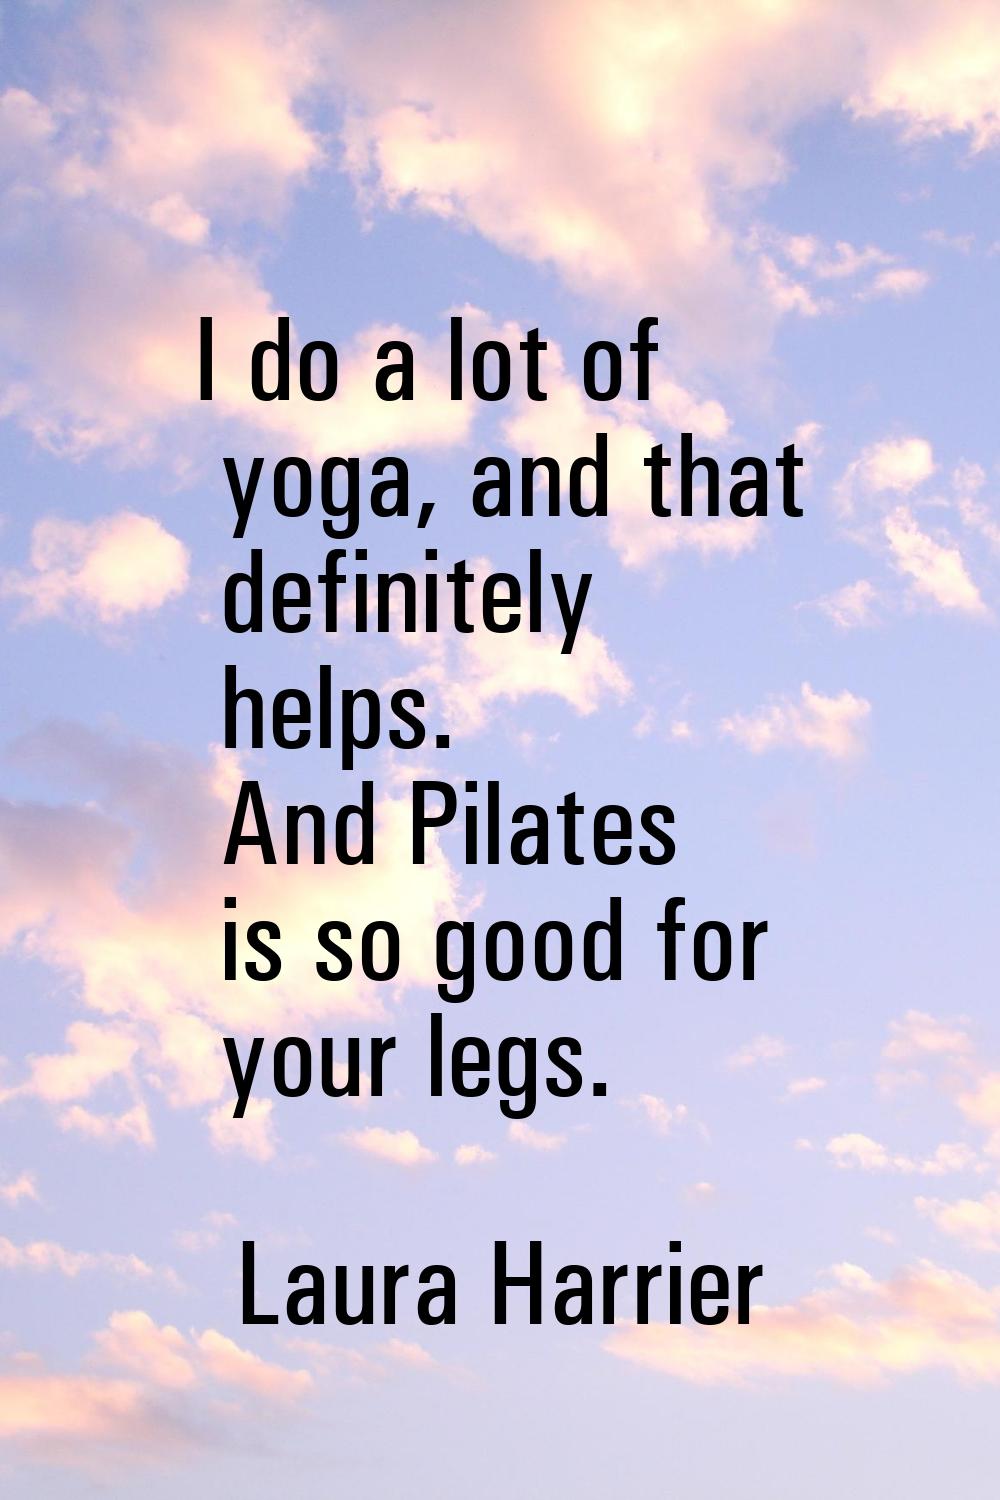 I do a lot of yoga, and that definitely helps. And Pilates is so good for your legs.